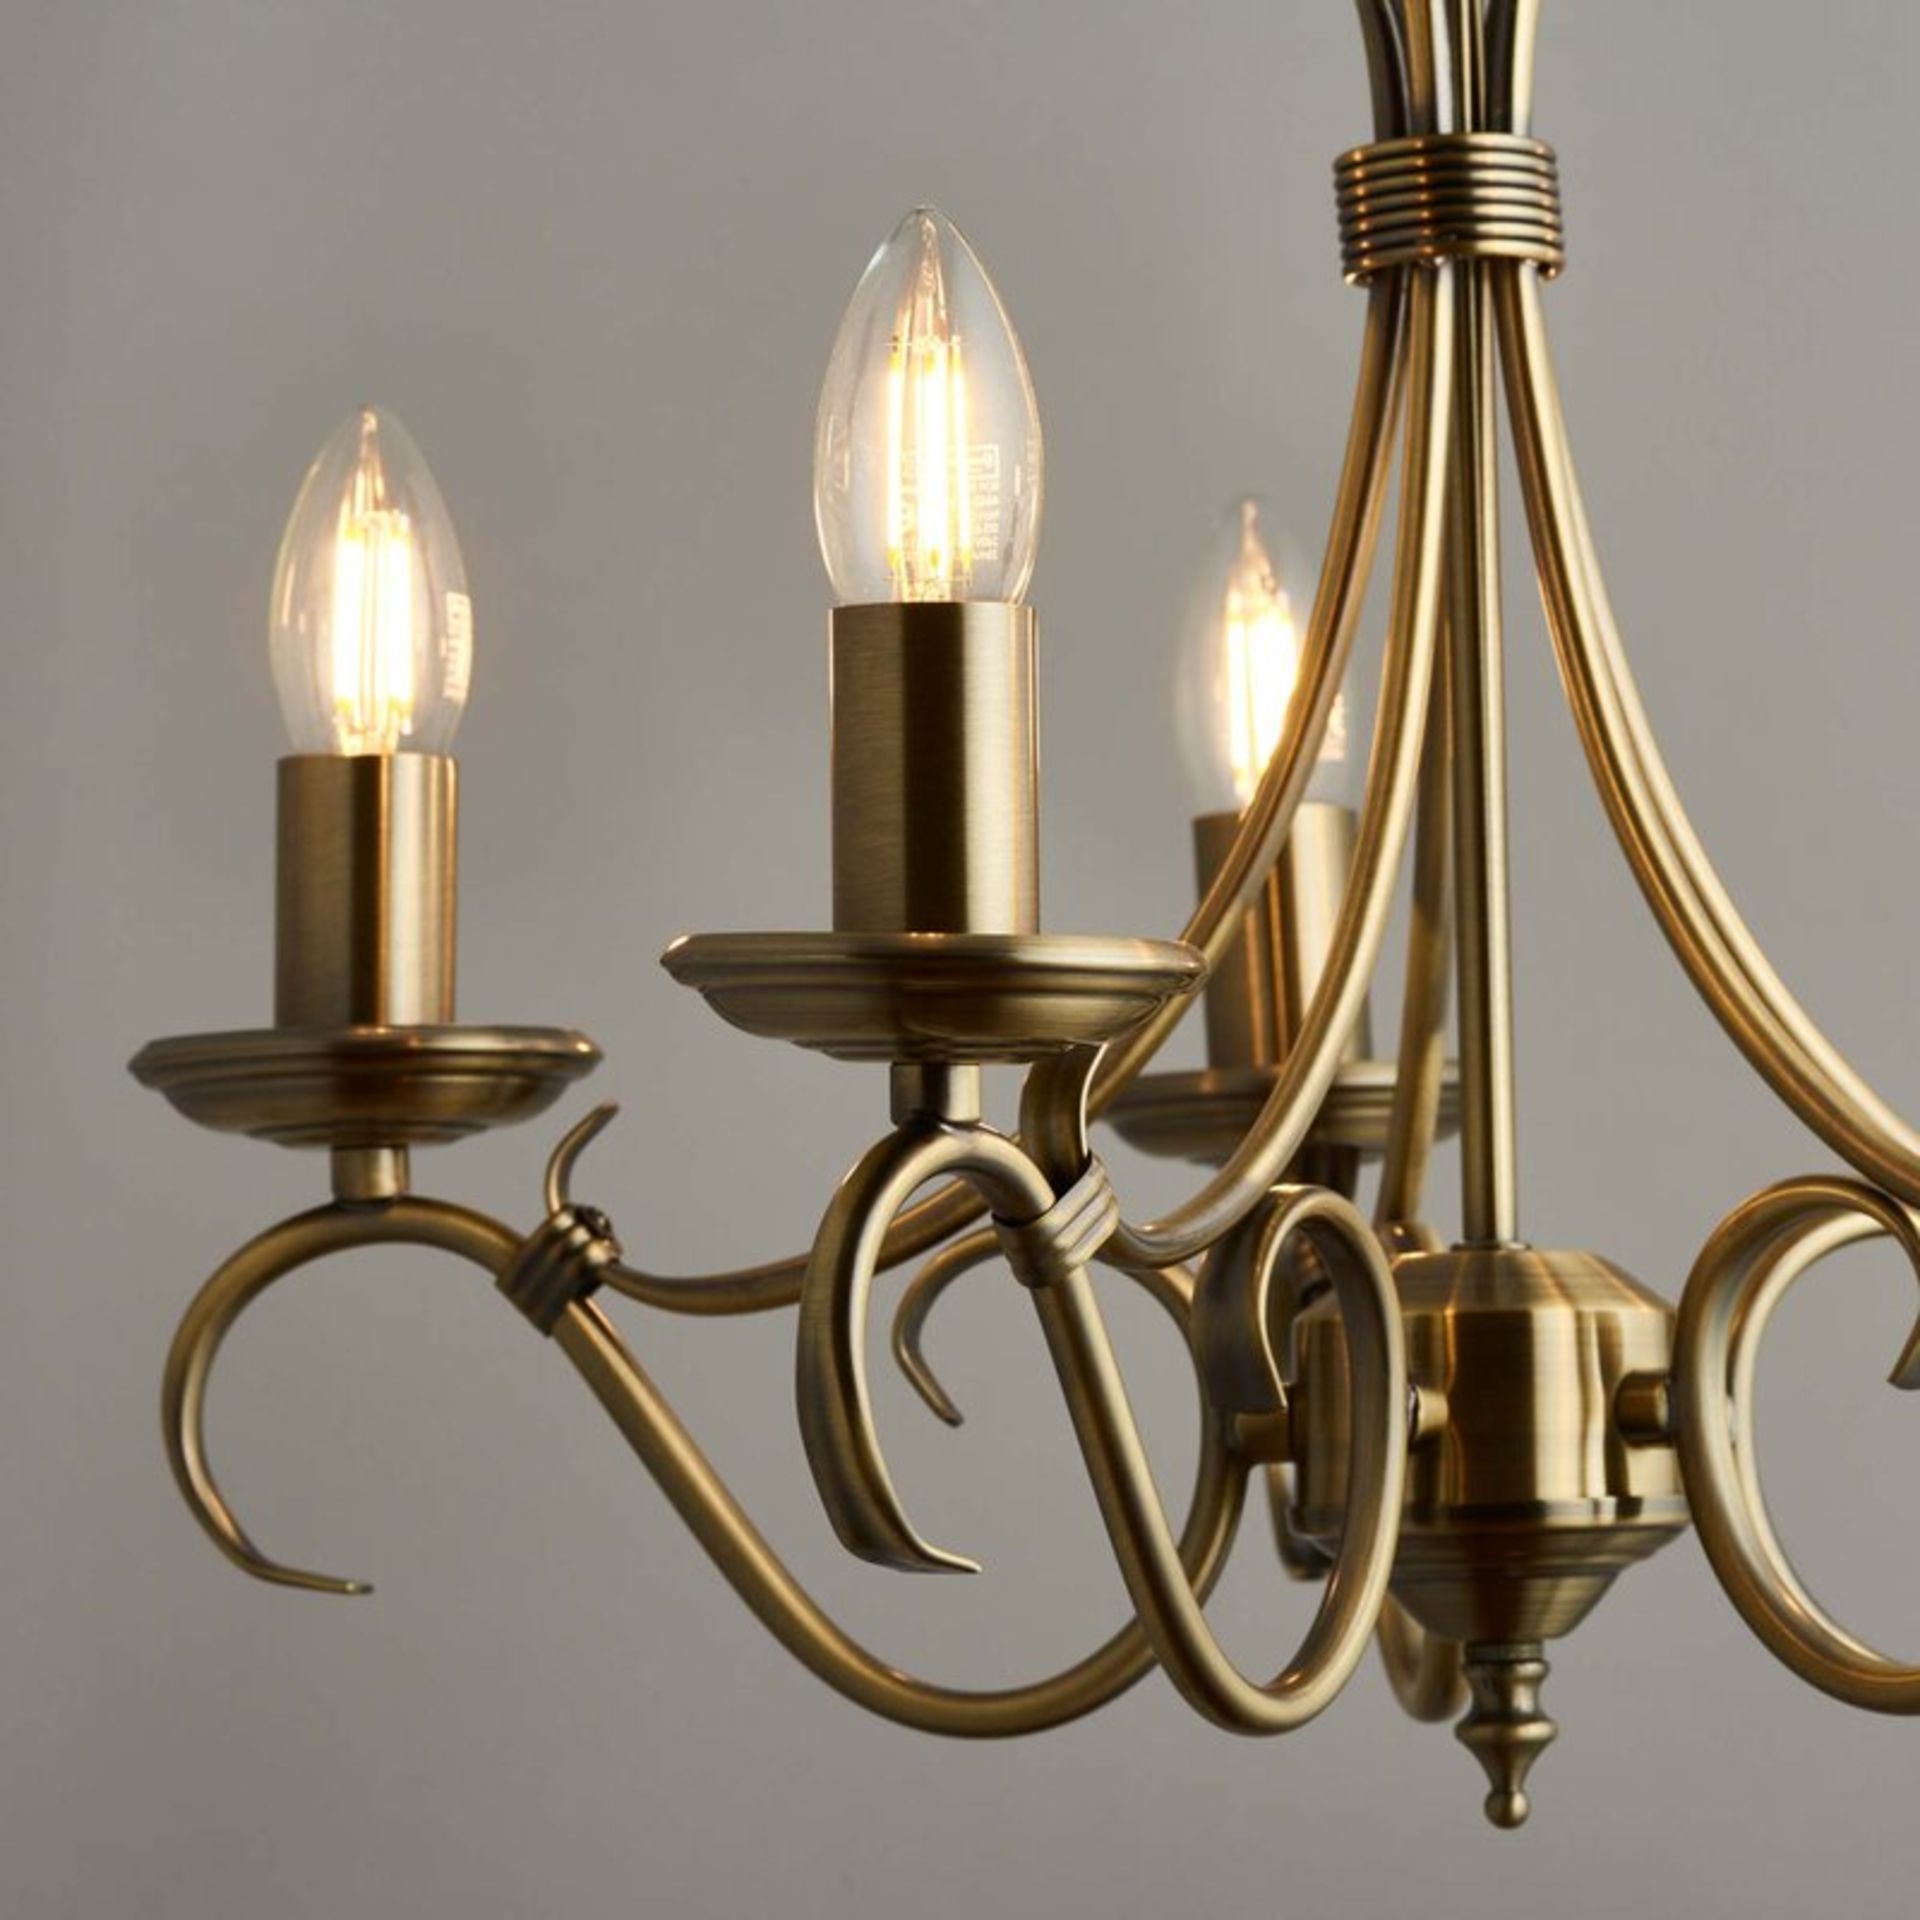 Barney 5-Light Candle Style Chandelier - RRP £132.00. - Image 3 of 4